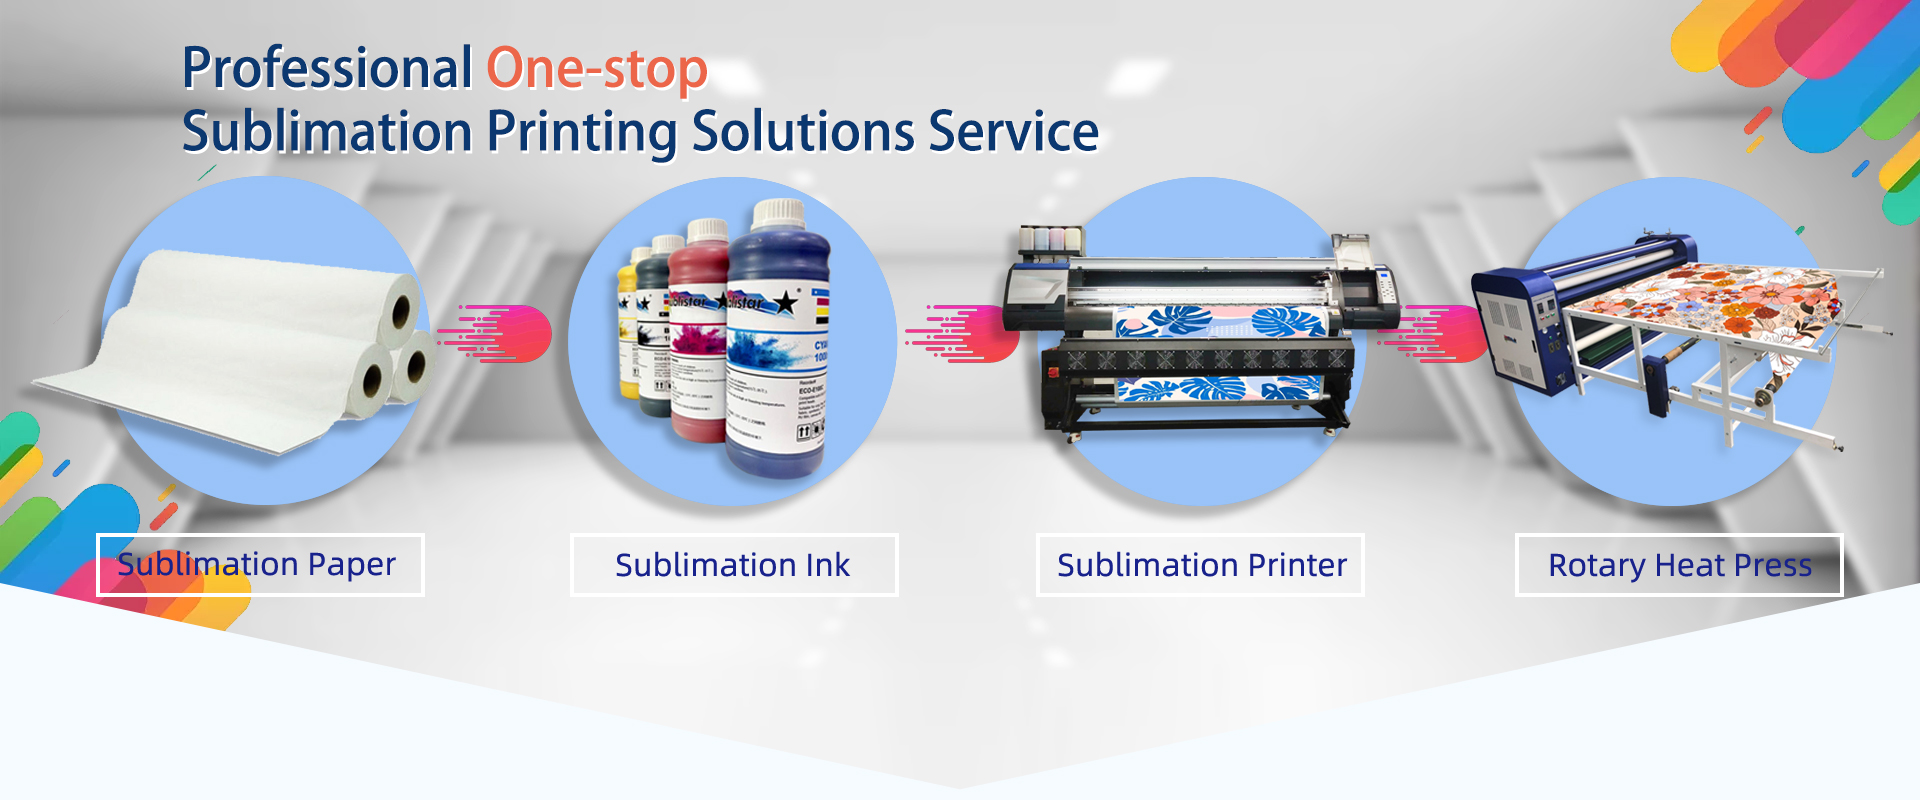 using the dye sublimation ink attention